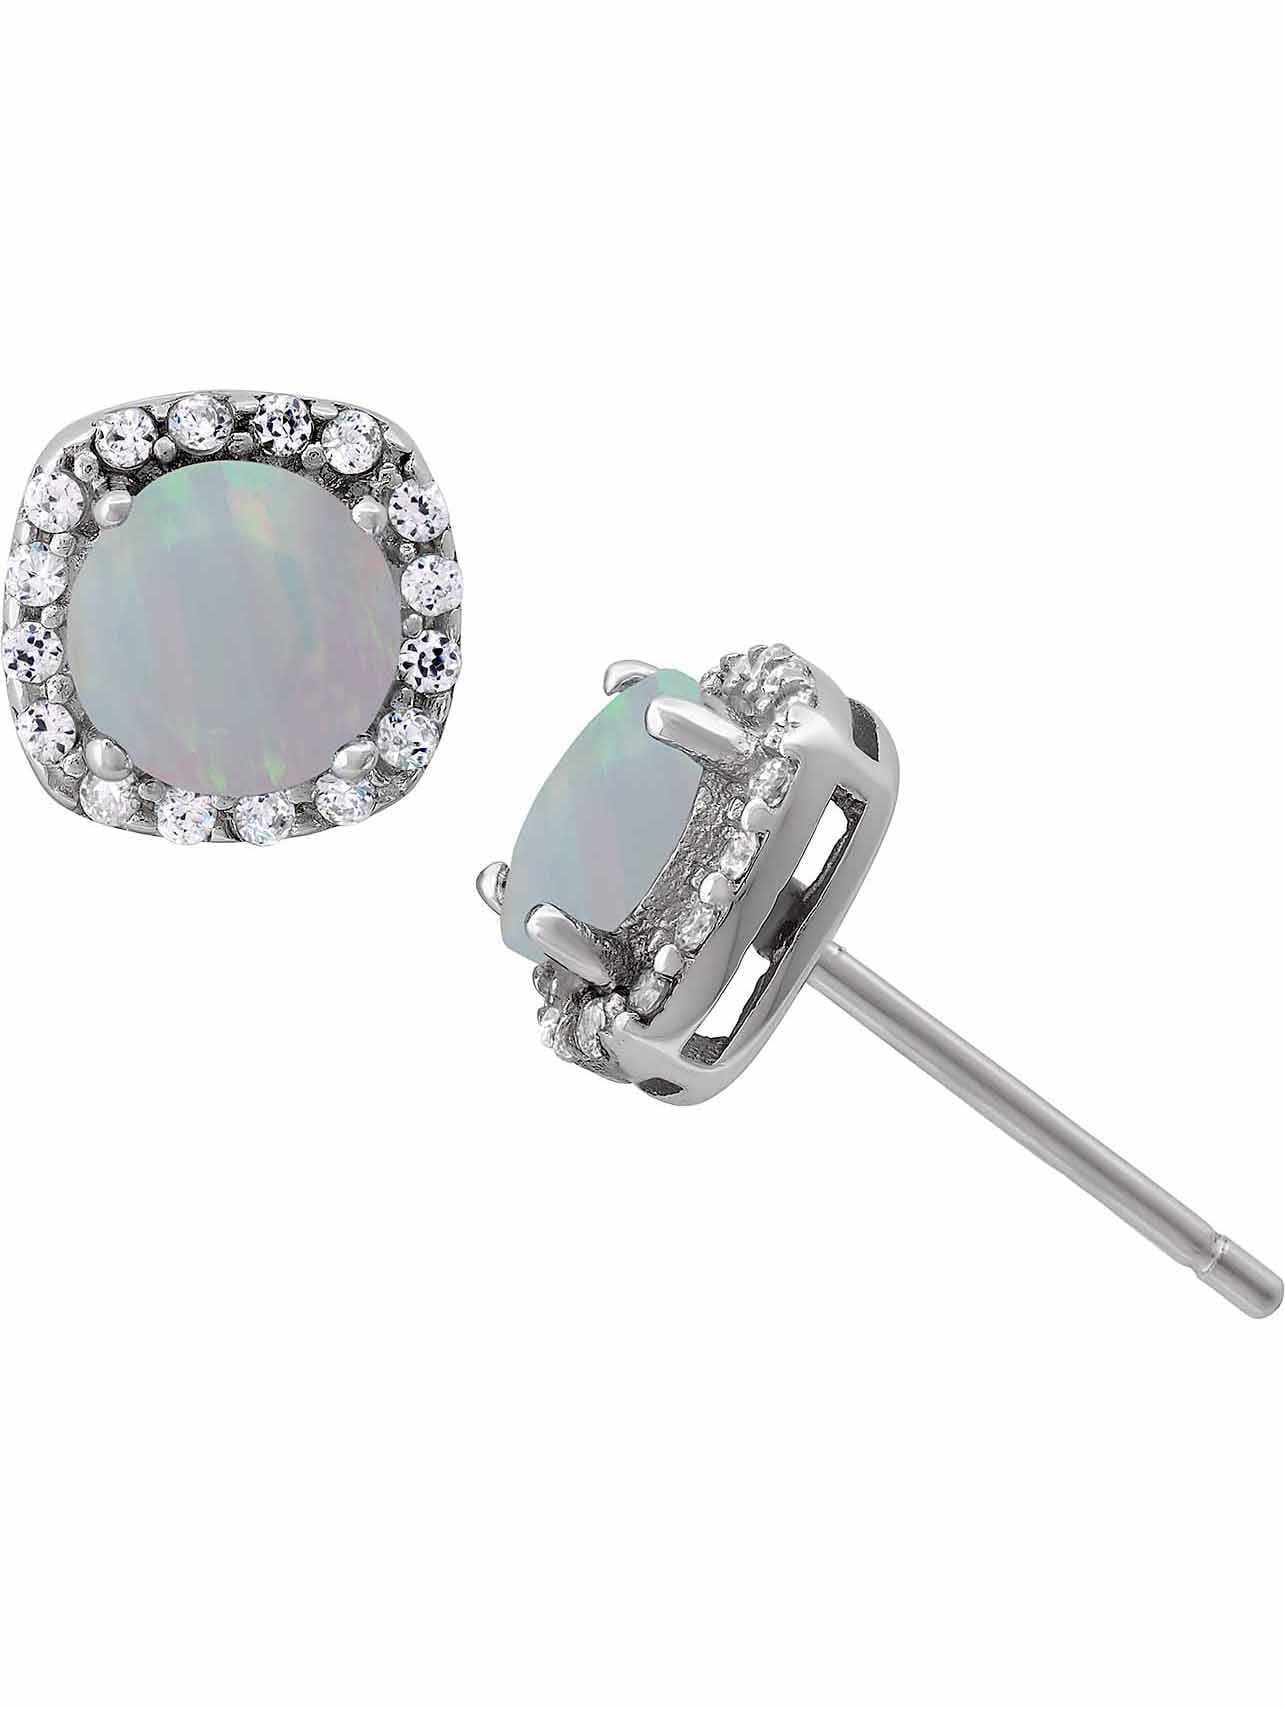 New Halo round multi micro CZ stones .925 Sterling Silver Stud Earrings Unisex